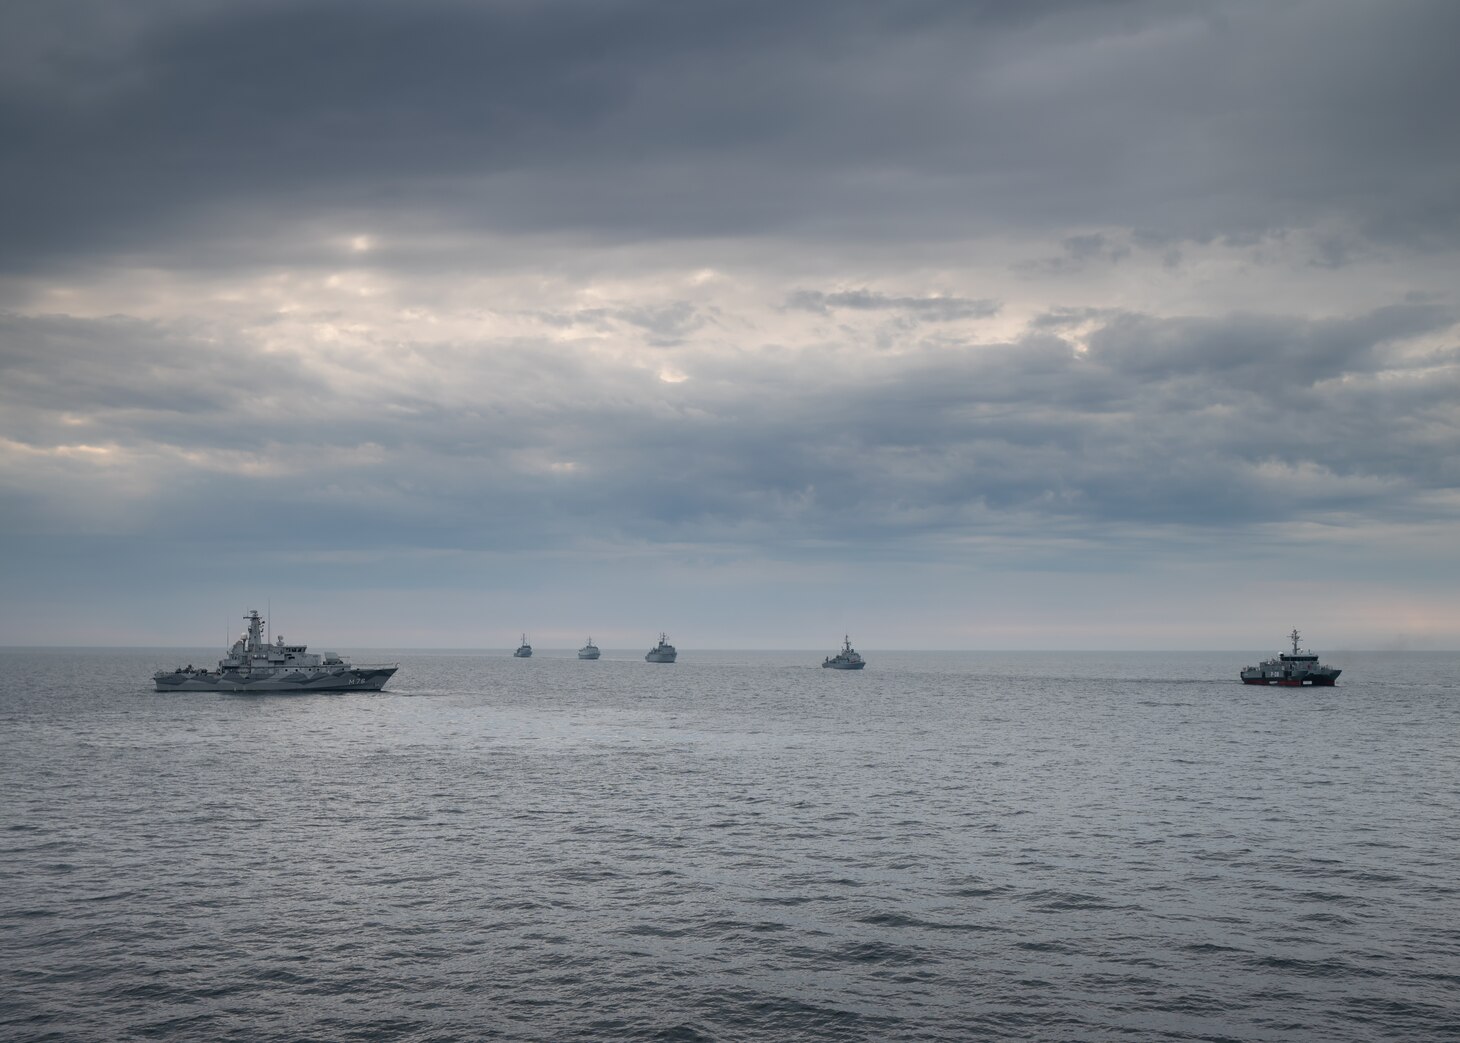 The Swedish minehunter HSwMS Ven (M76) and other NATO Ally and partner ships are underway during exercise BALTOPS22.